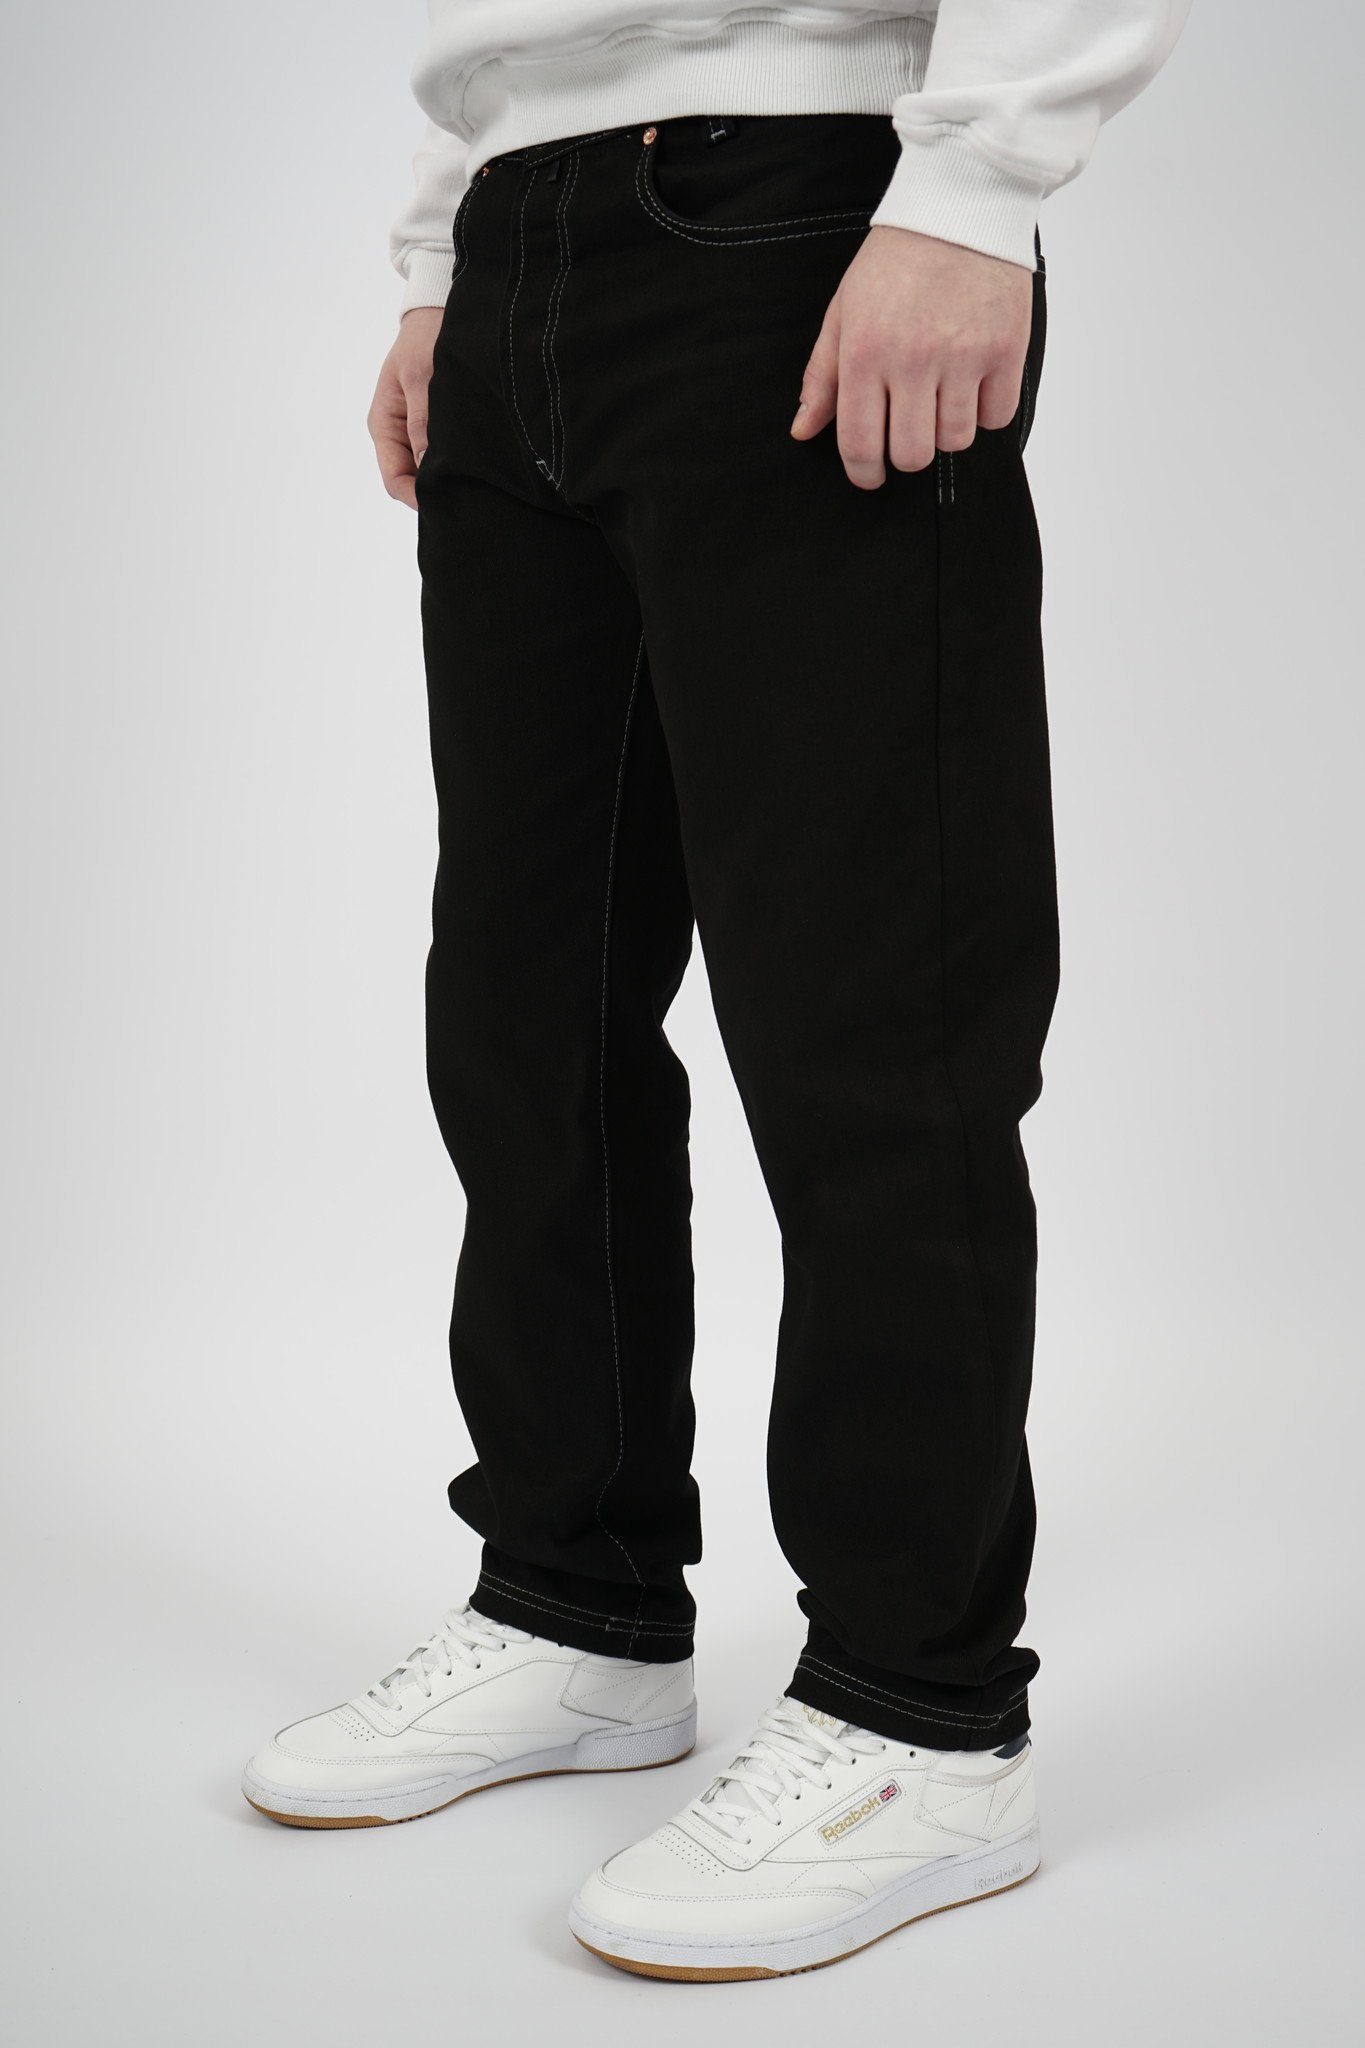 PICALDI Jeans 5-Pocket-Jeans »New Zicco 473-PLATIN/BLACK« 5-Packet-Style